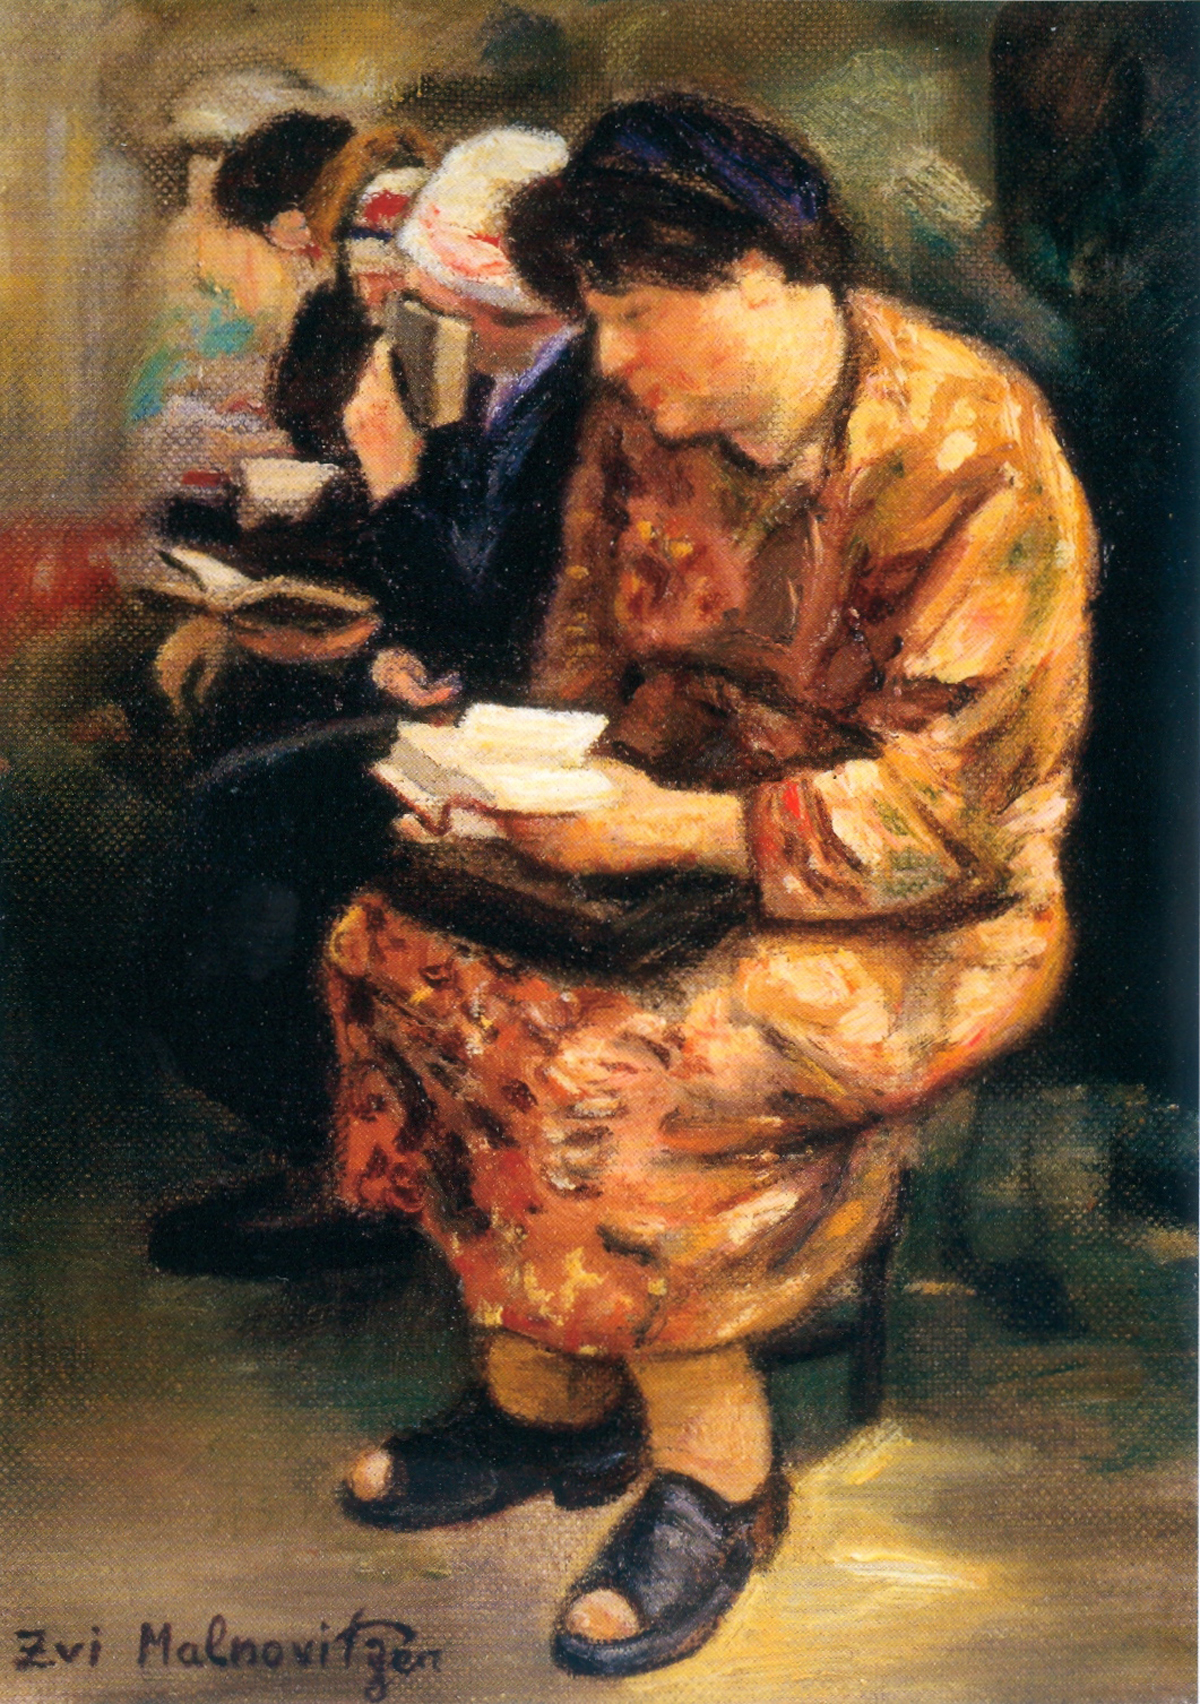 Women Praying (2006), oil on canvas by Zvi Malnovitzer Private Collection, New York